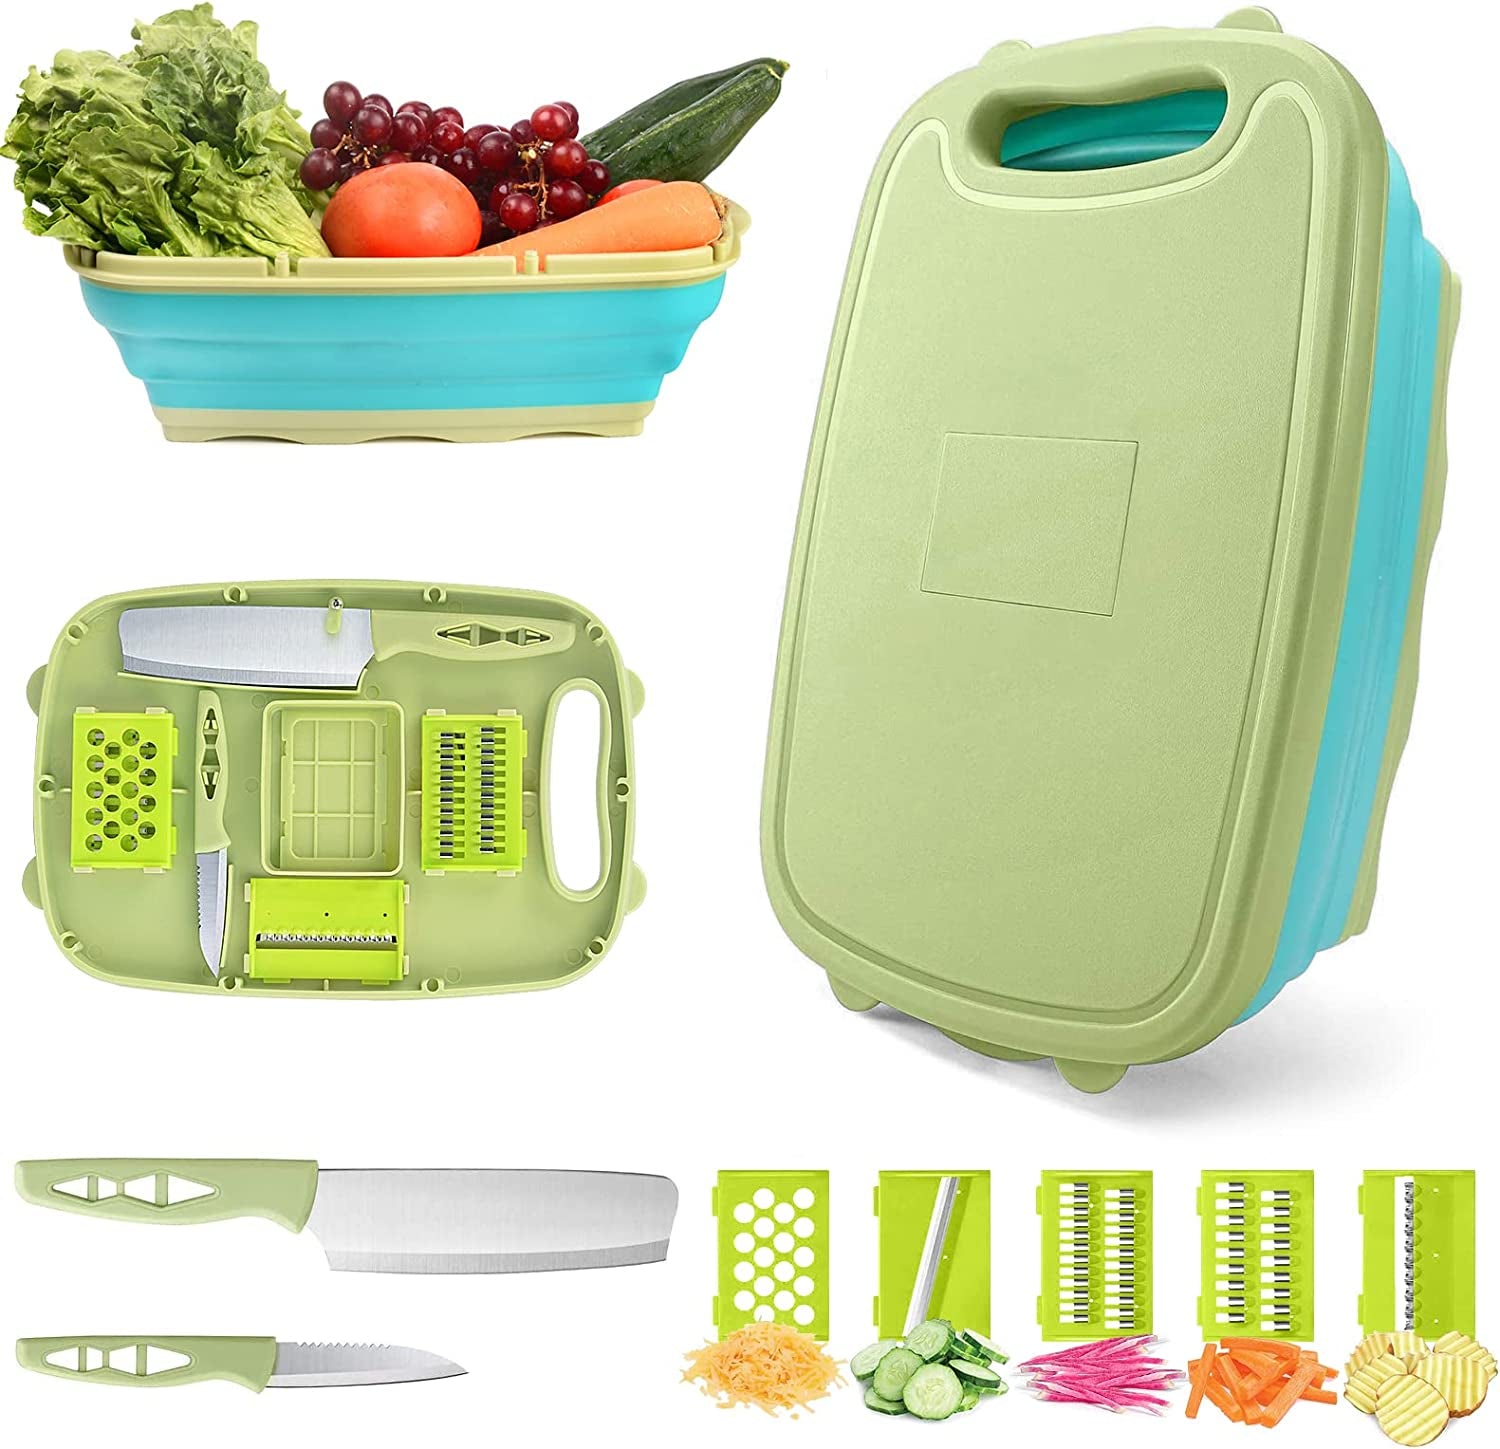 Collapsible Cutting Board,  Foldable Chopping Board with Colander, 9-In-1 Multi Chopping Board Kitchen Vegetable Washing Basket Silicone Dish Tub for Camping, Picnic, BBQ, Kitchen-Green